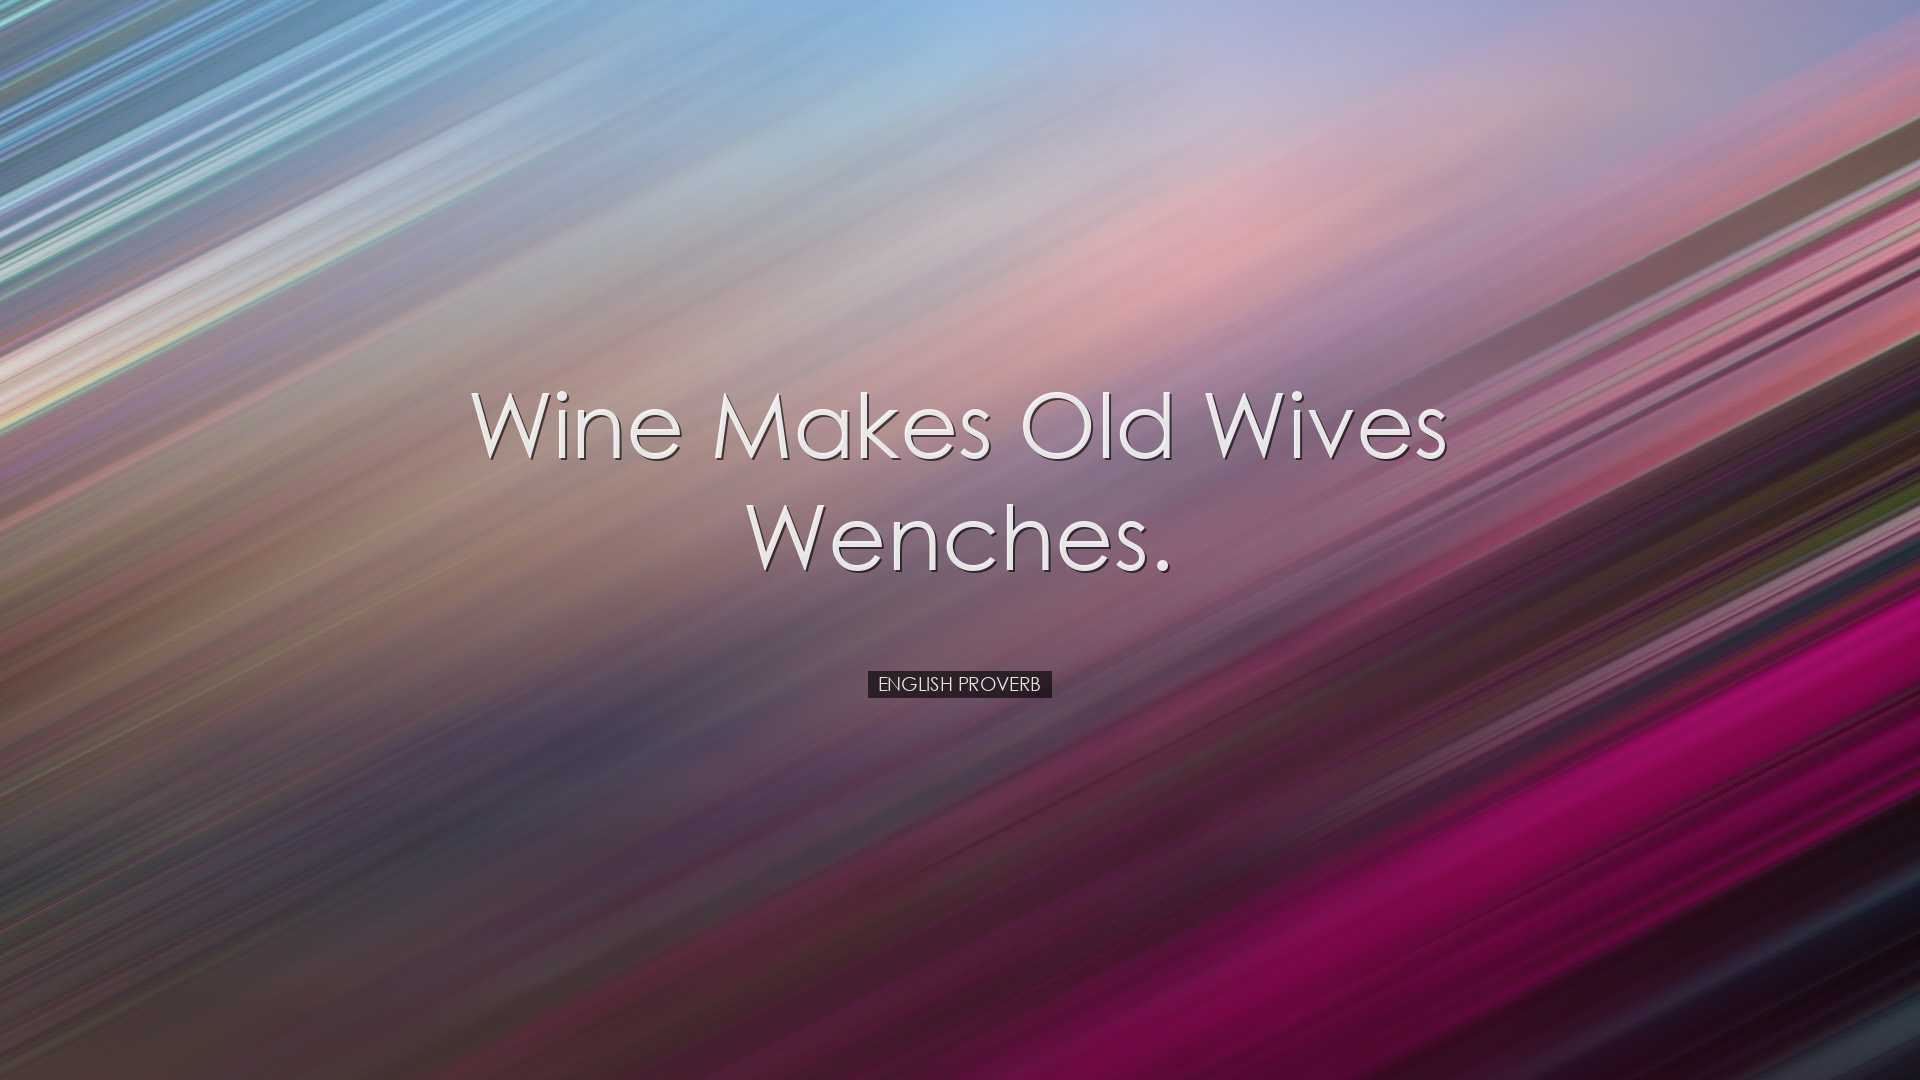 Wine makes old wives wenches. - English proverb